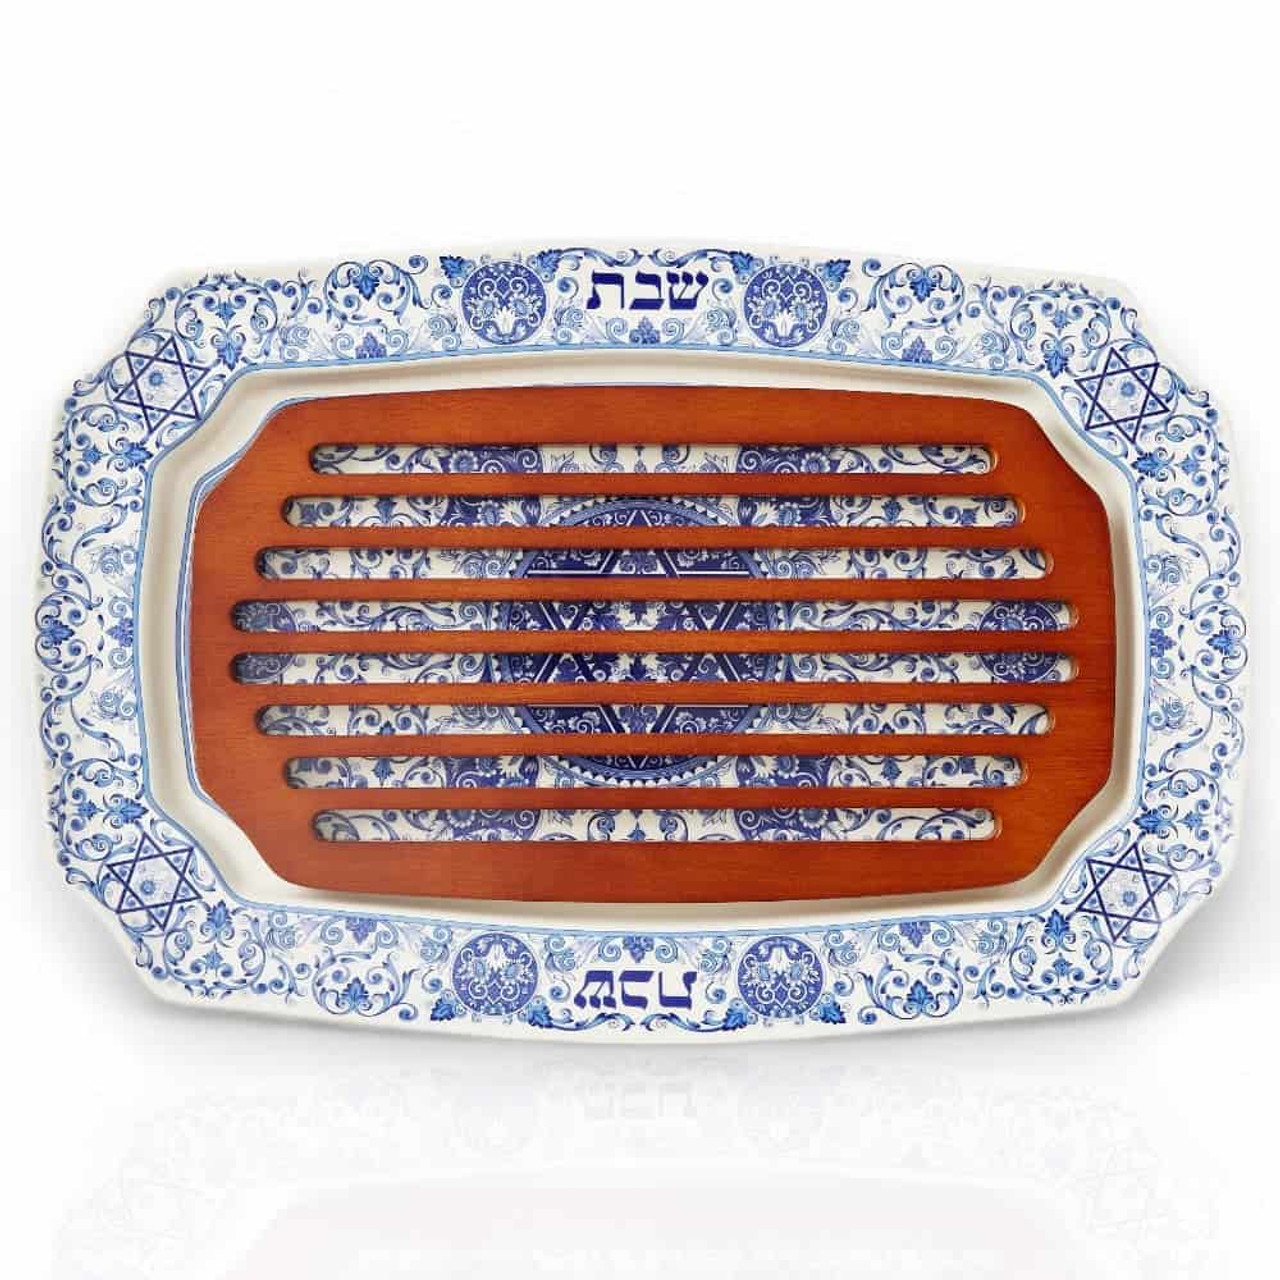 https://cdn11.bigcommerce.com/s-gtyjsq0orx/images/stencil/1280x1280/products/16814/17208/Spode_Porcelain_Challah_Tray_With_Wood_Insert_SP1891175__05009.1684007991.jpg?c=1